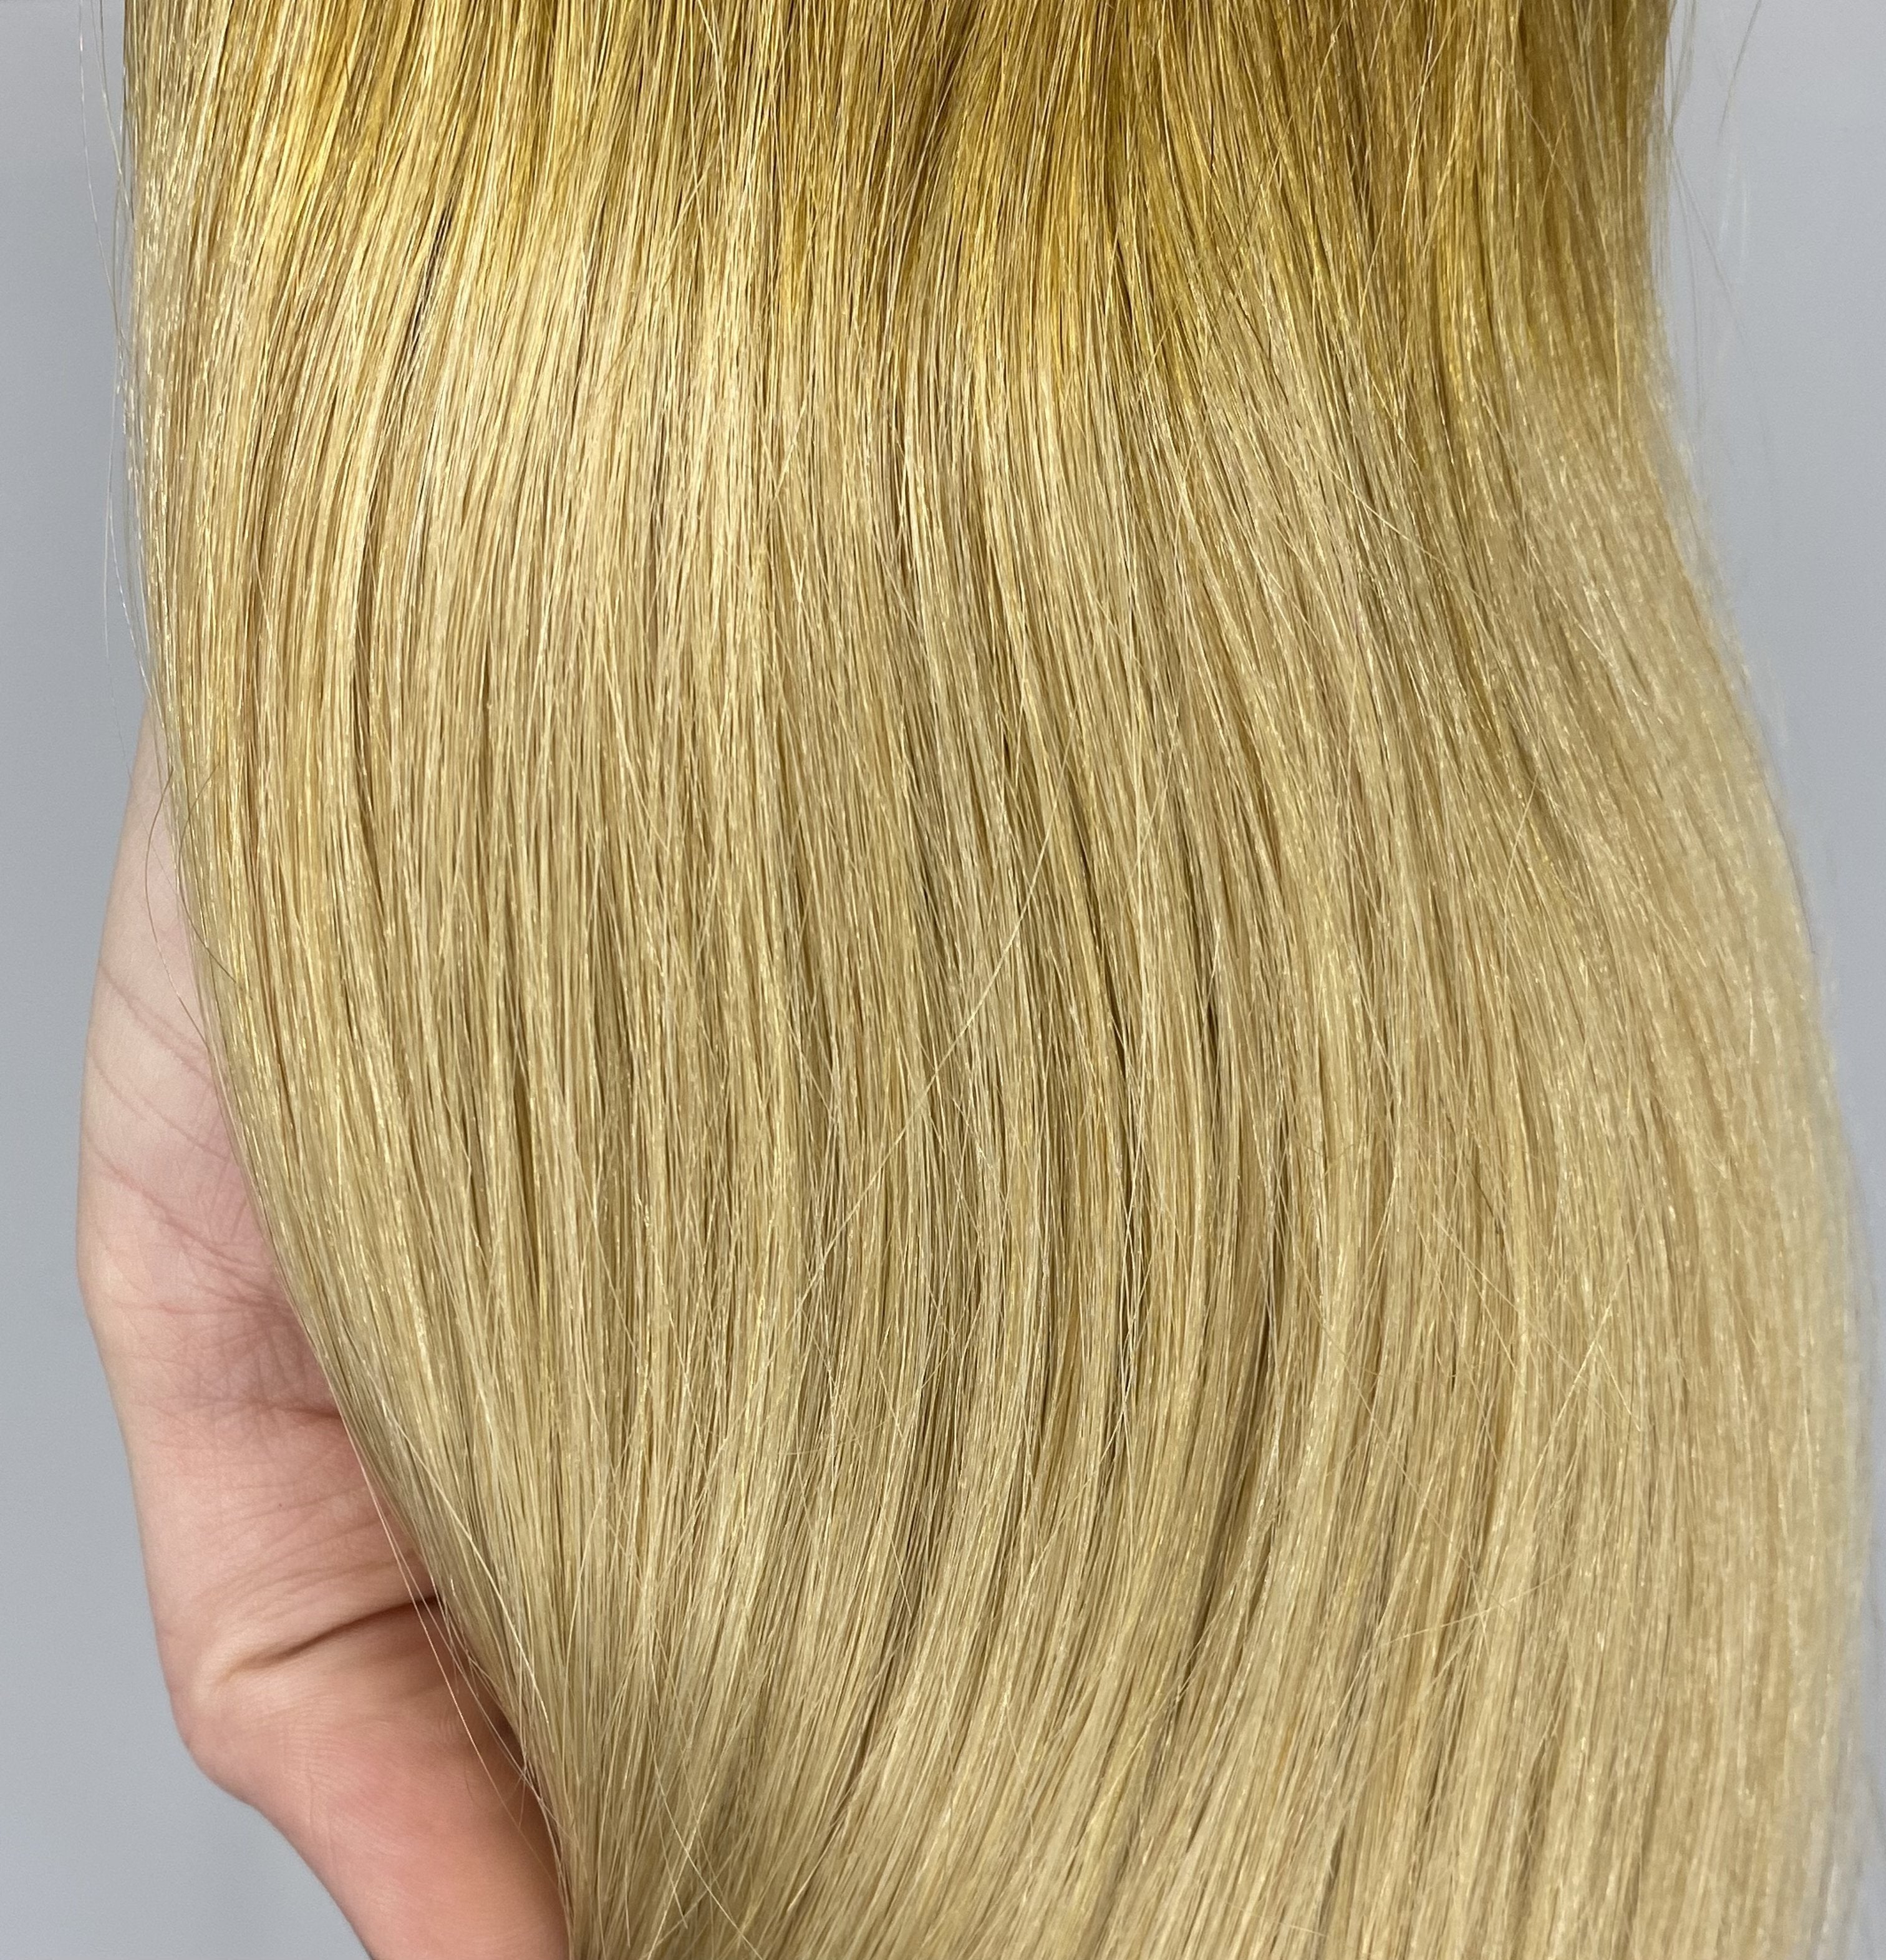 Velo Sale #6&16 - 20 inches - Copper Golden Blonde into Light Golden Blonde Ombre